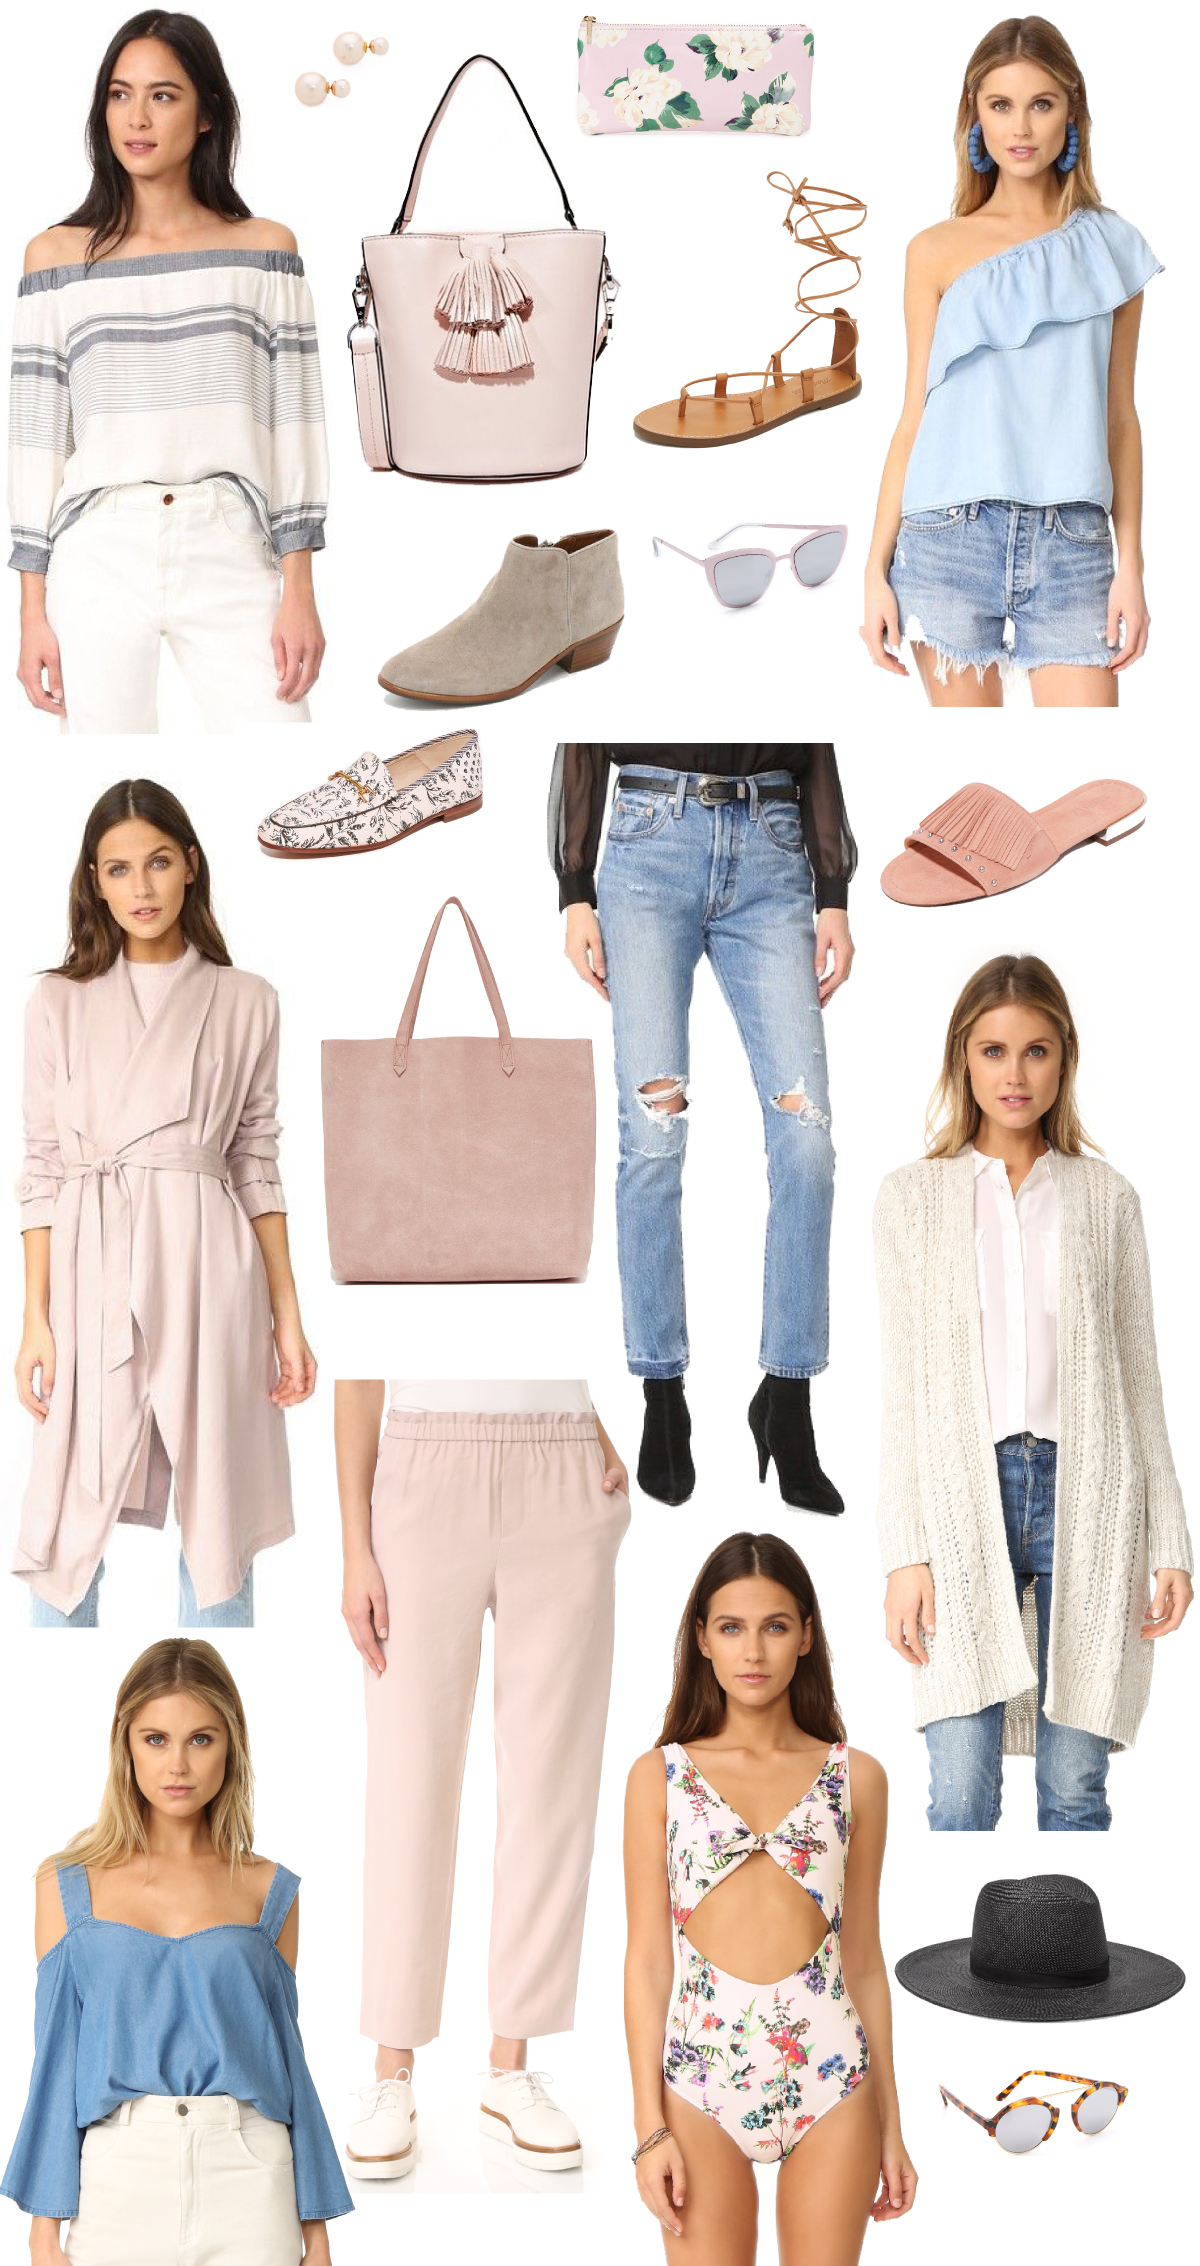 The Best of Shopbop Sale!